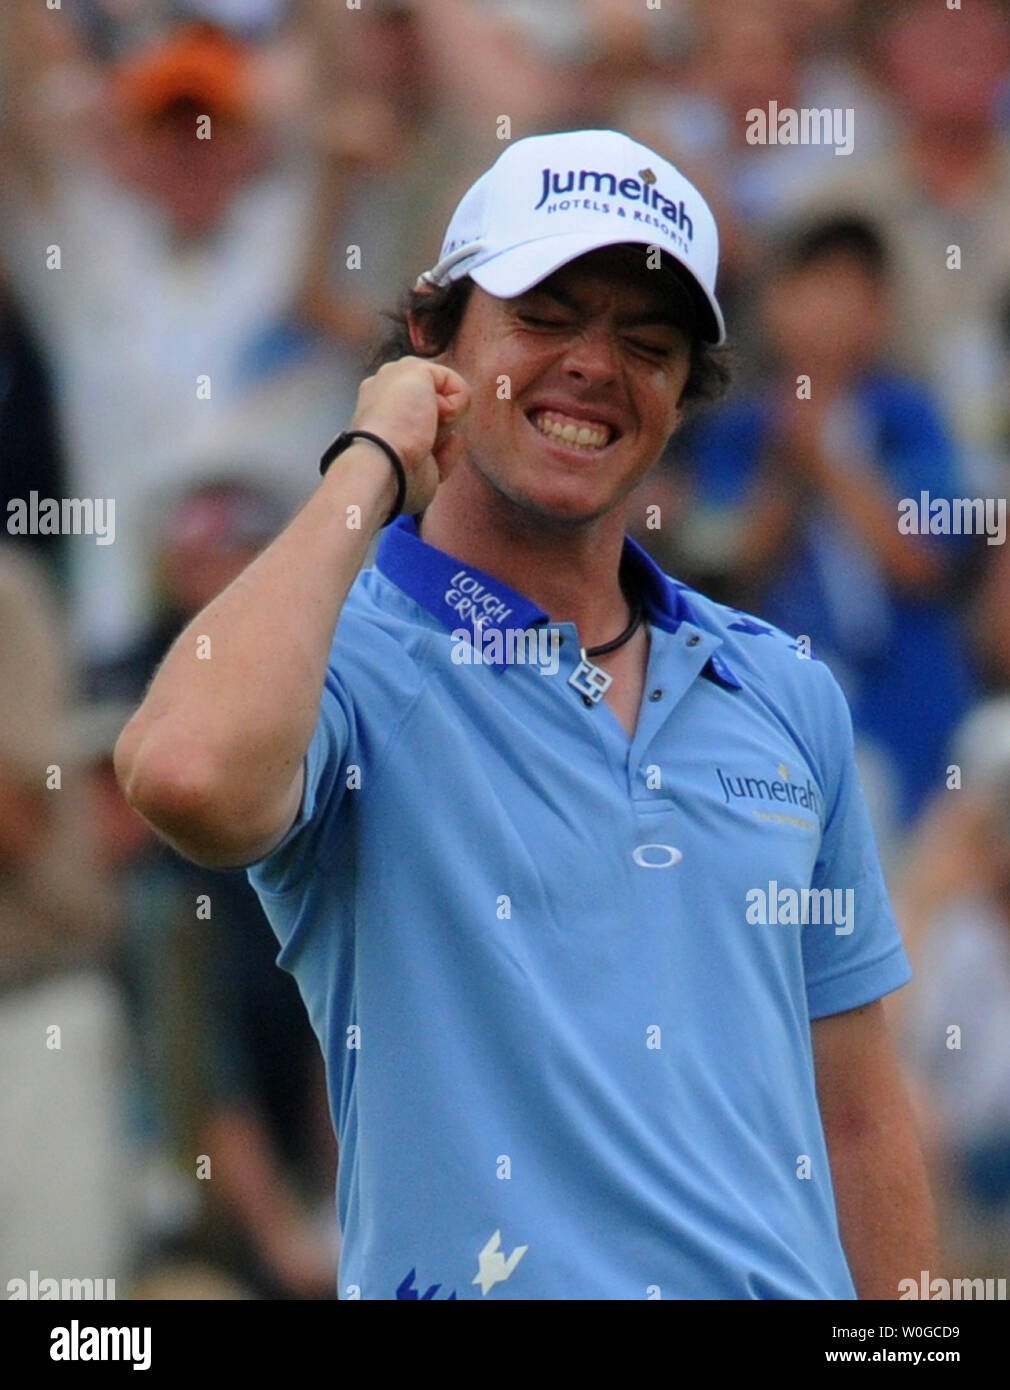 Northern Ireland's Rory McIlroy smiles and jubilates after making his final putt and winning the 2011 U.S. Open golf championship at Congressional Country Club in Bethesda, Maryland on June 19, 2011.  McIlroy set a record in winning with a 16-under-par score.     UPI/Pat Benic Stock Photo